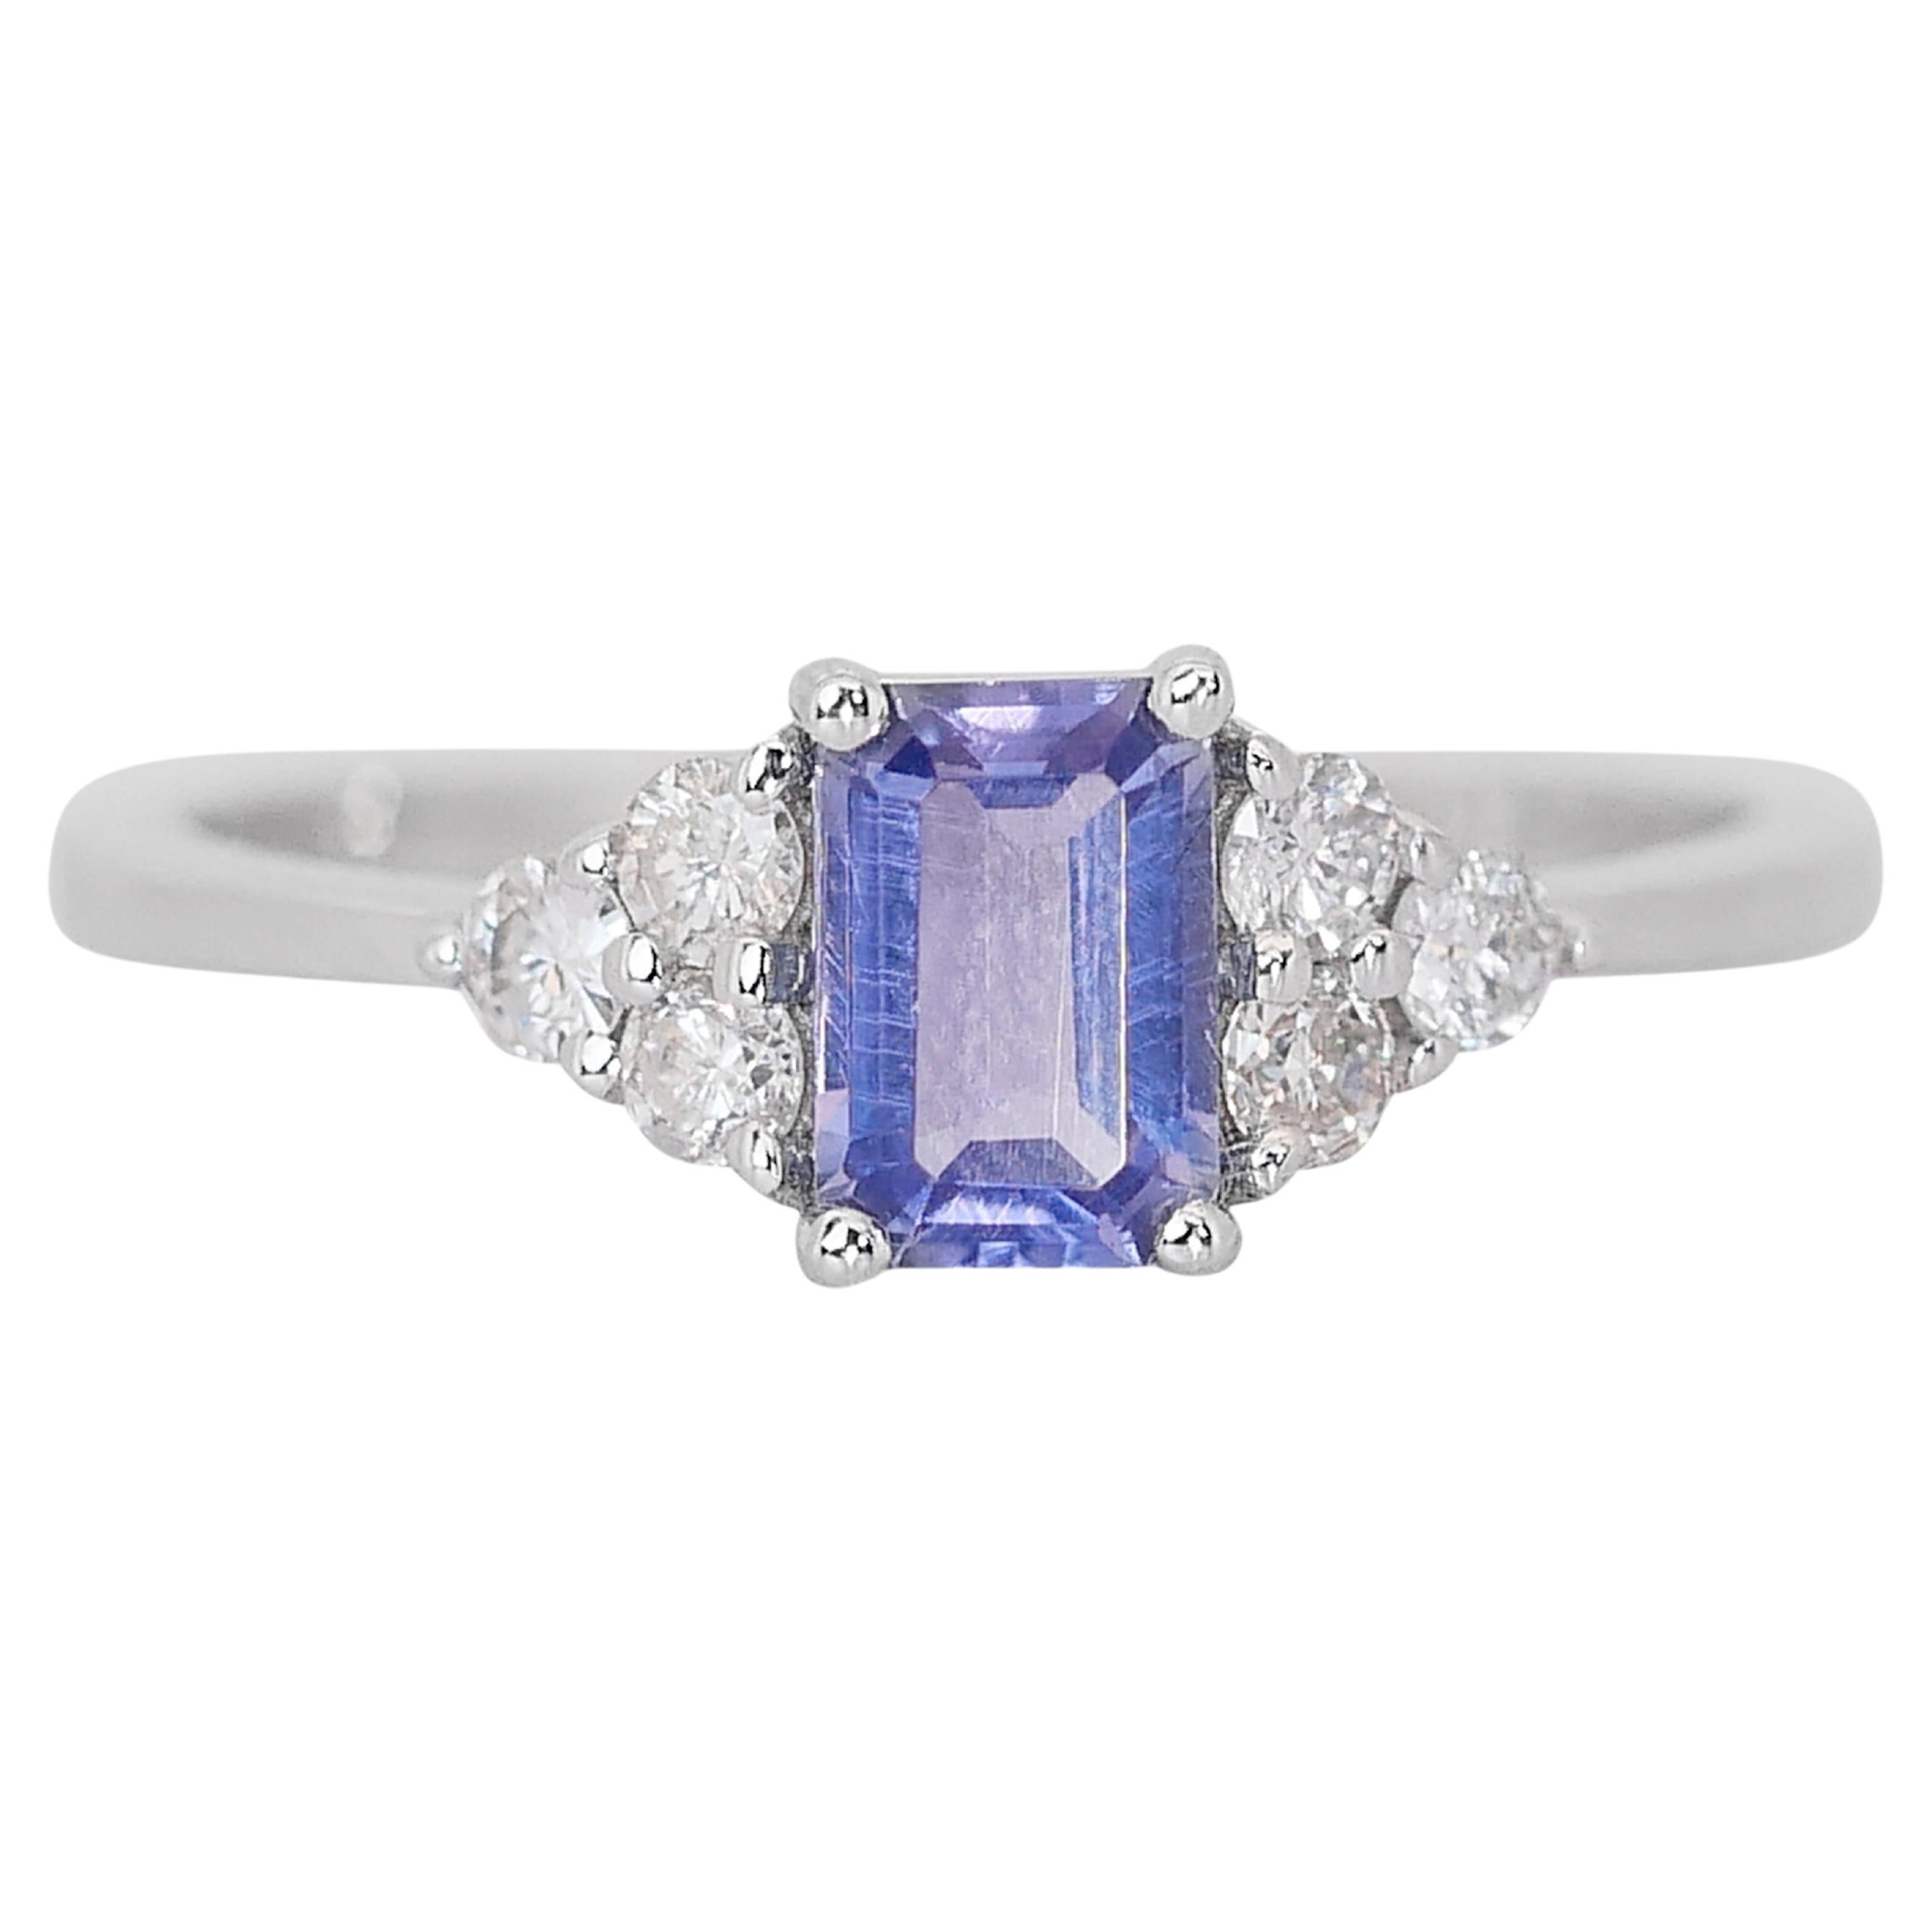 How can I tell if tanzanite is good quality?